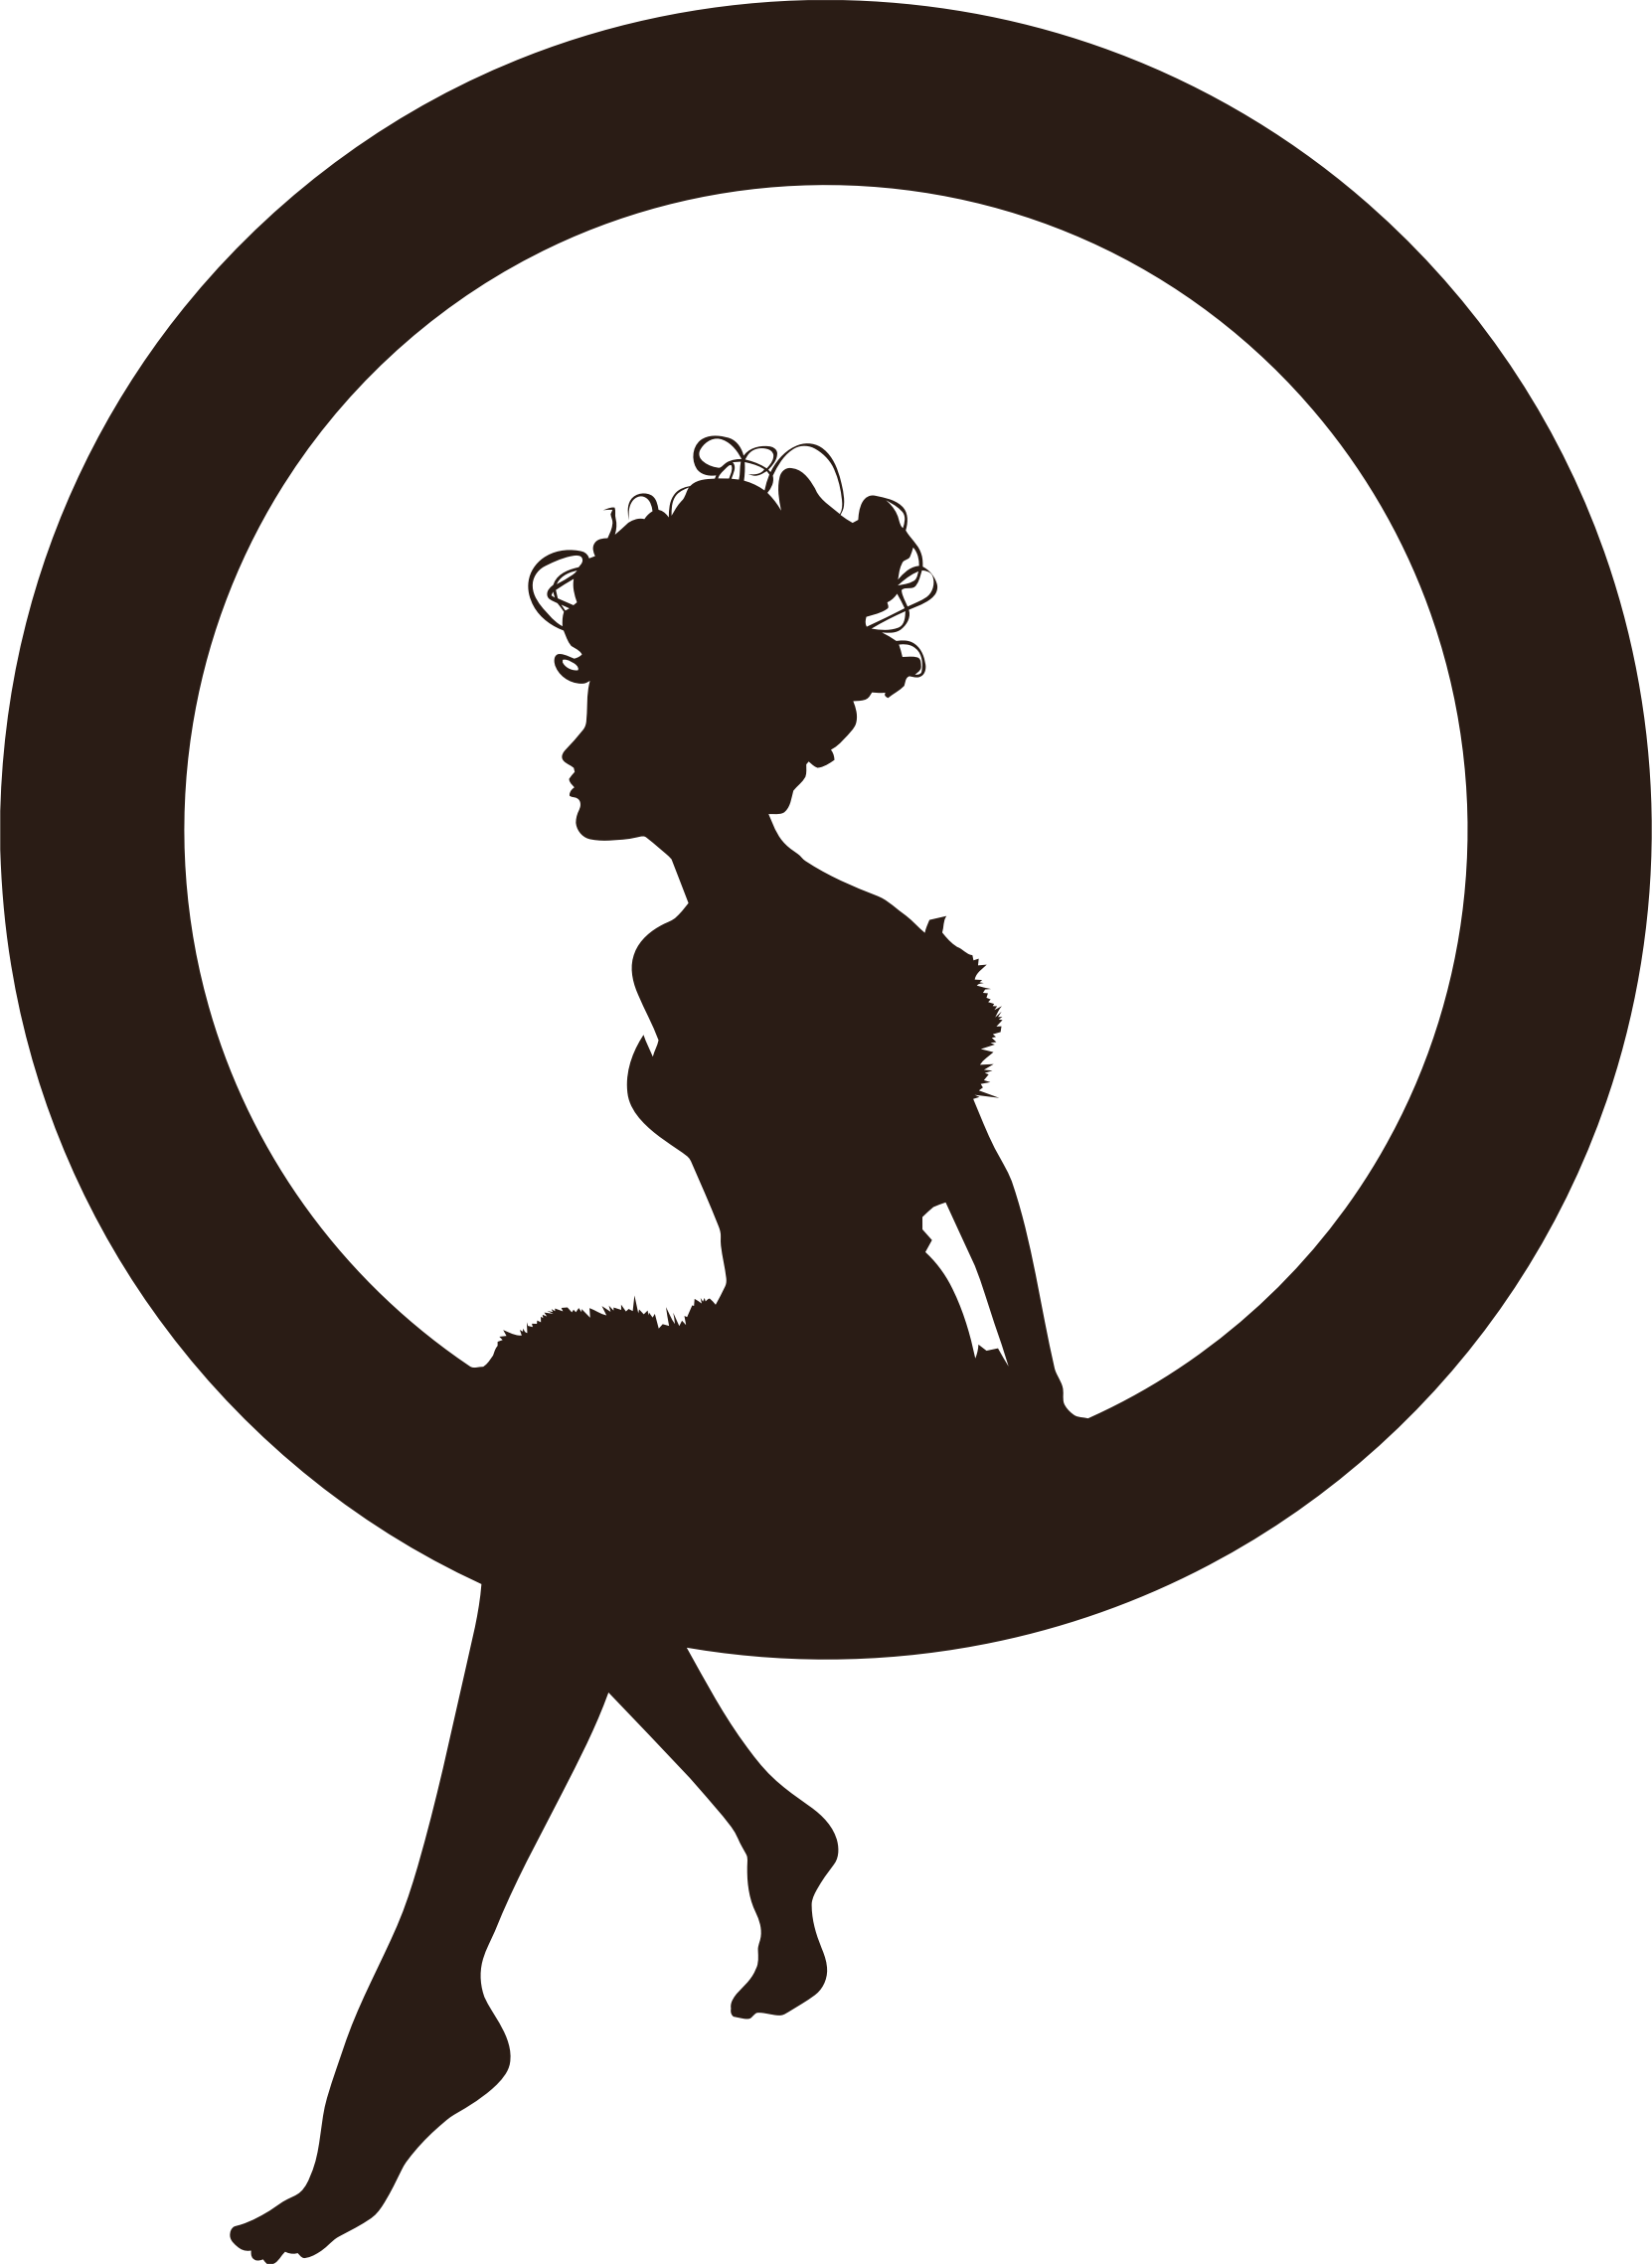 Clipboard clipart silhouette. Circle at getdrawings com